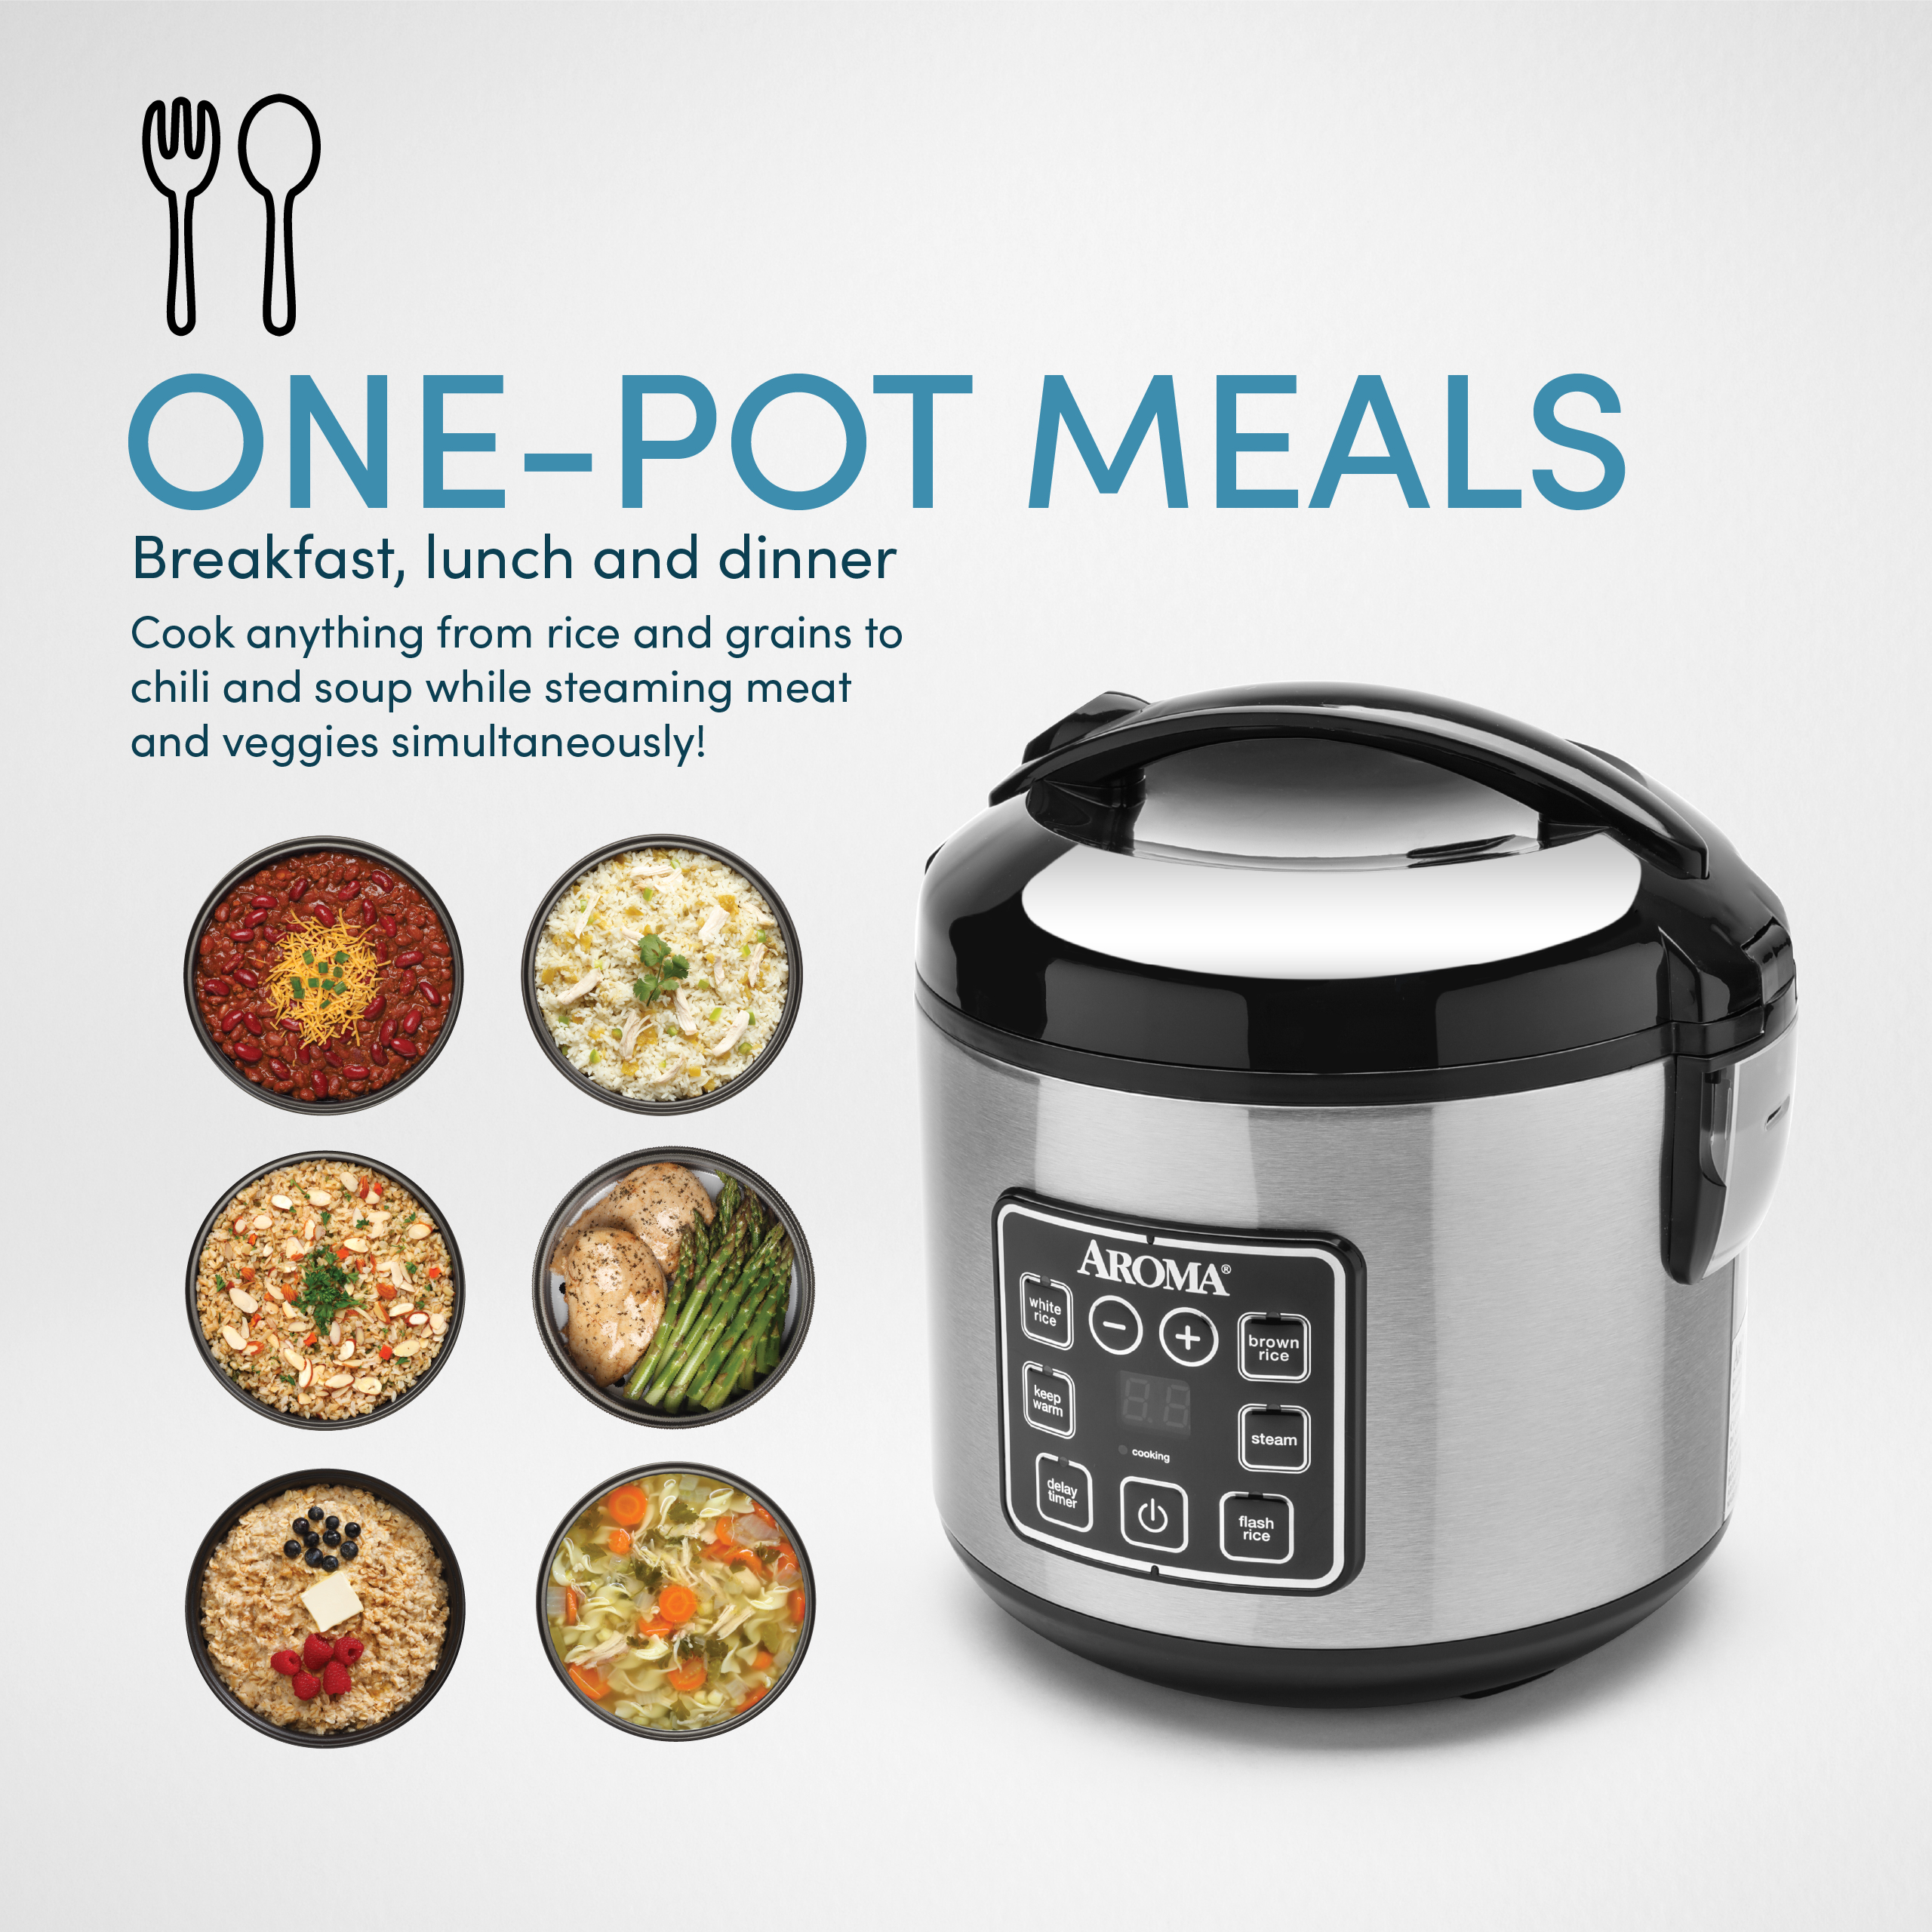 Aroma 8-Cup (Cooked) Rice & Grain Cooker, Steamer, New Bonded Granited Coating - image 3 of 10